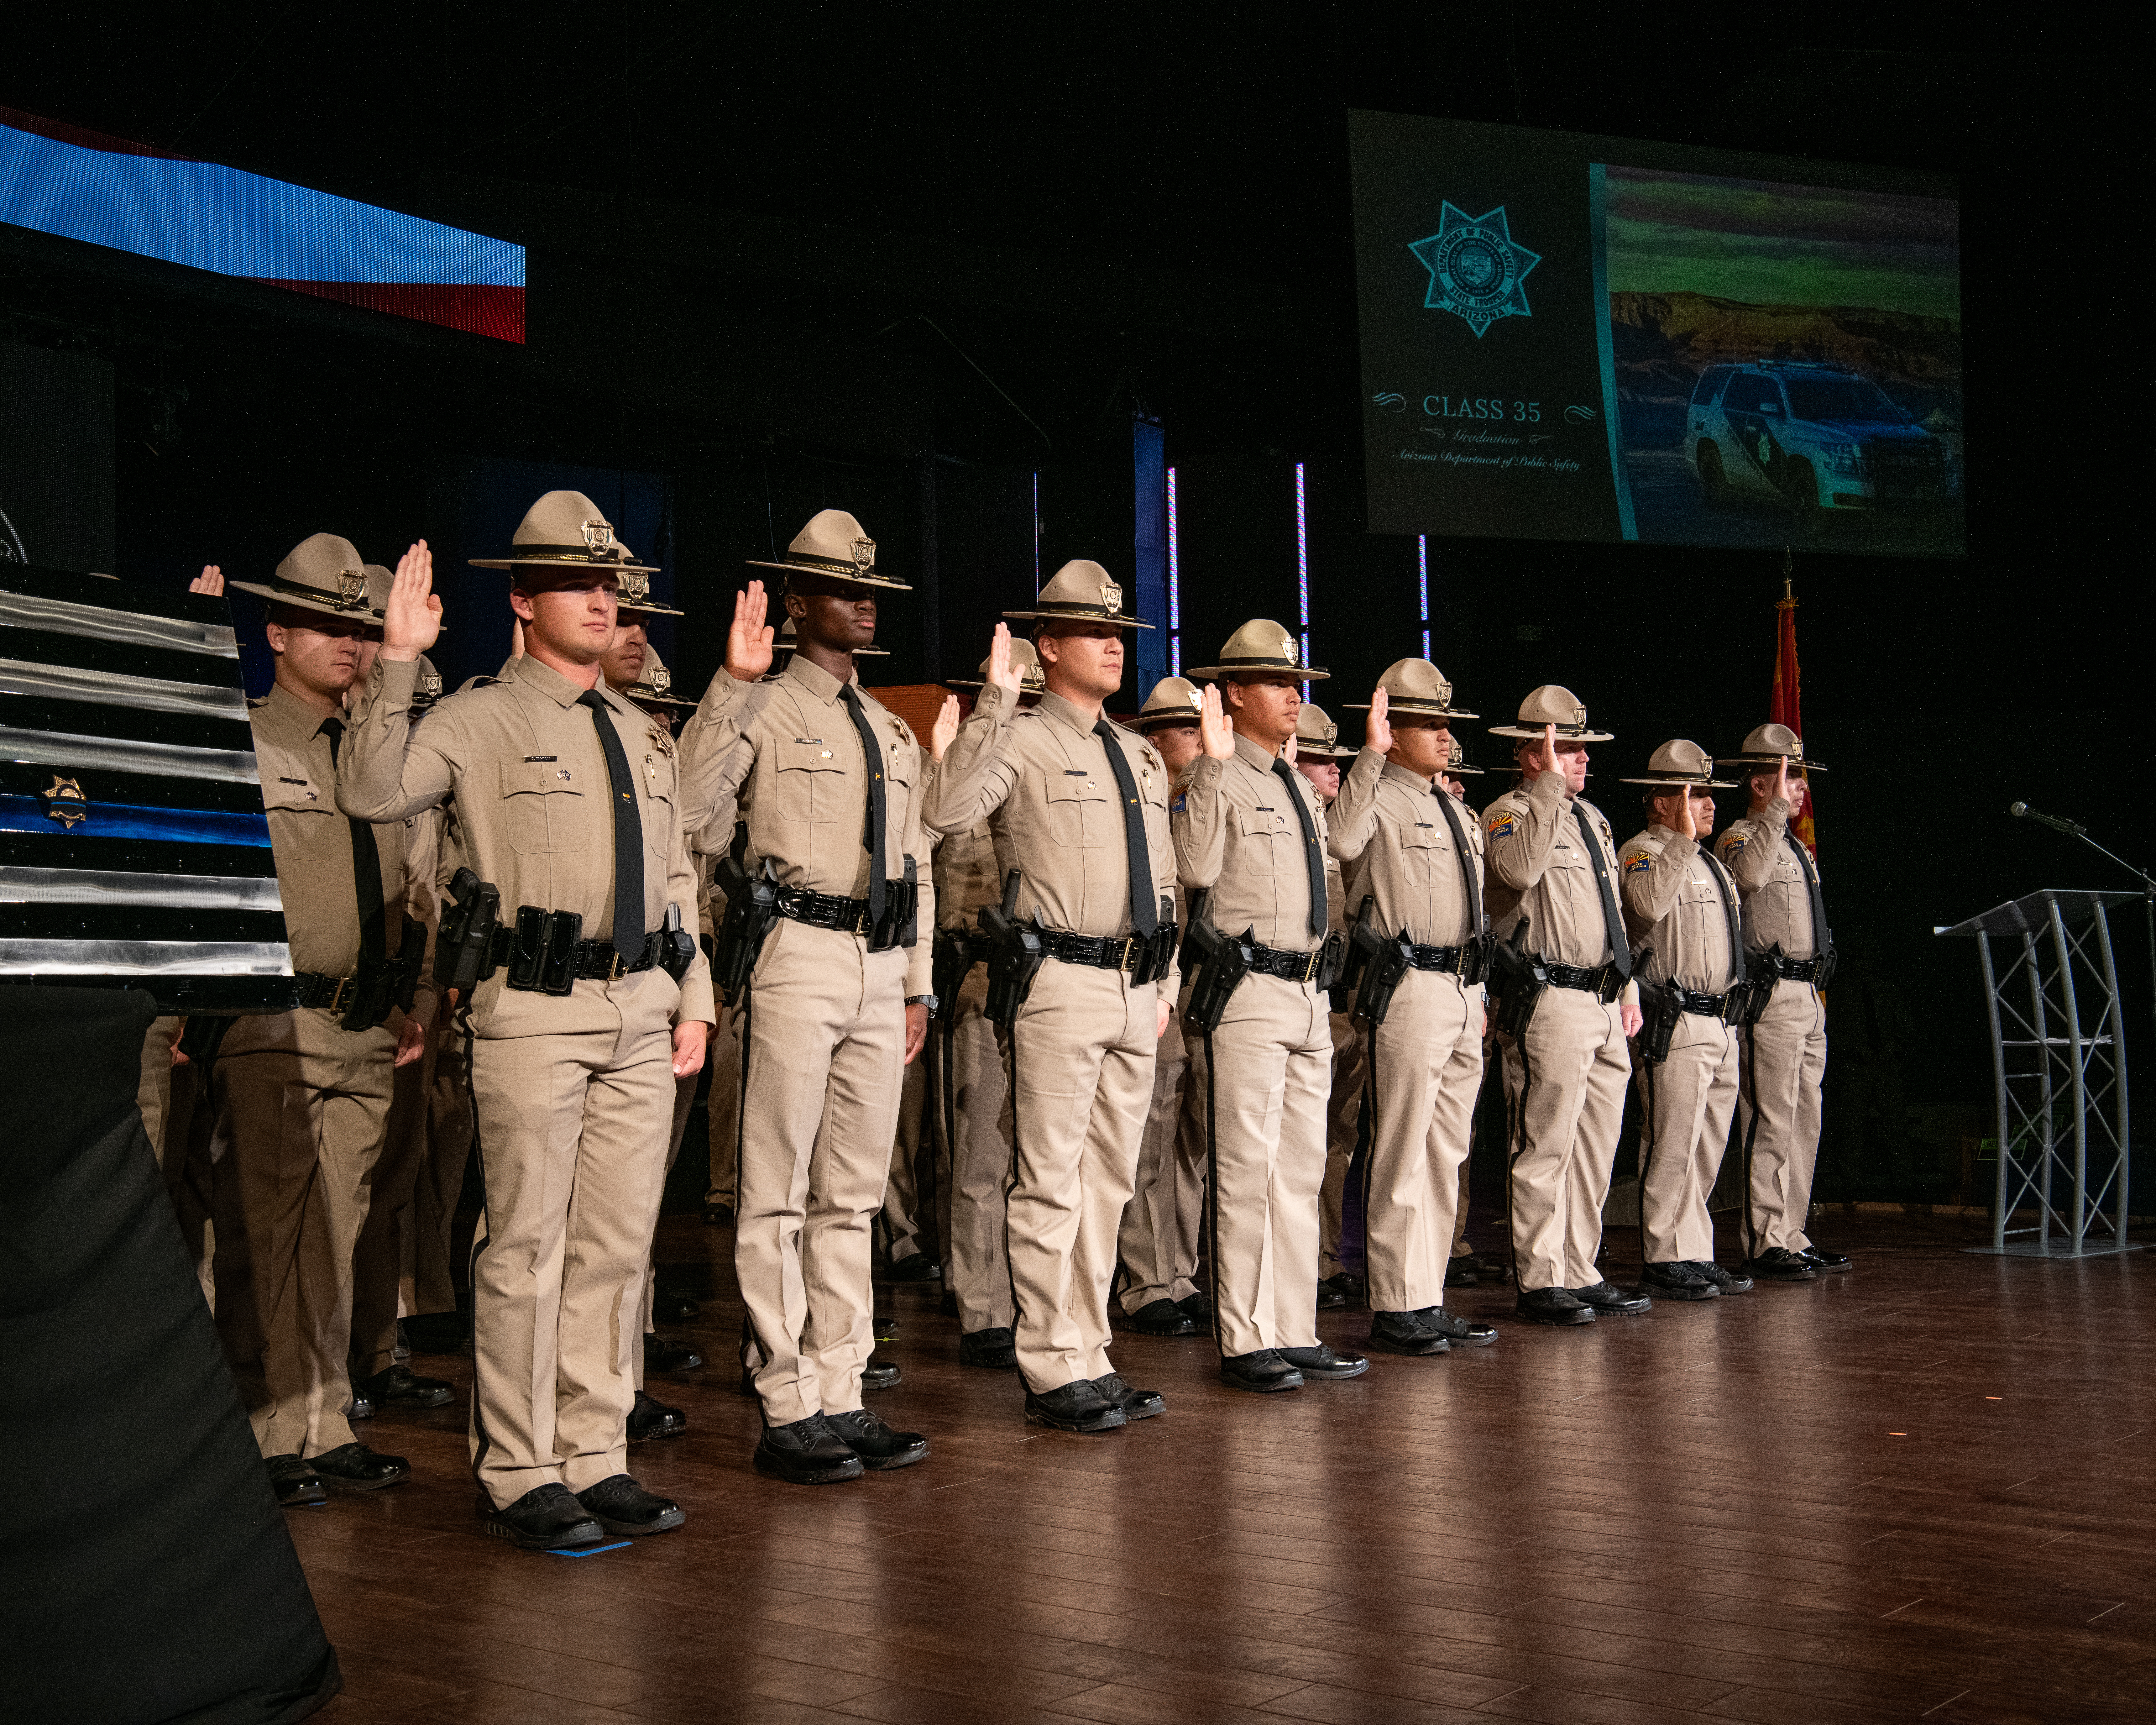 Class 35 on stage taking the peace officer oath during the graduation ceremony